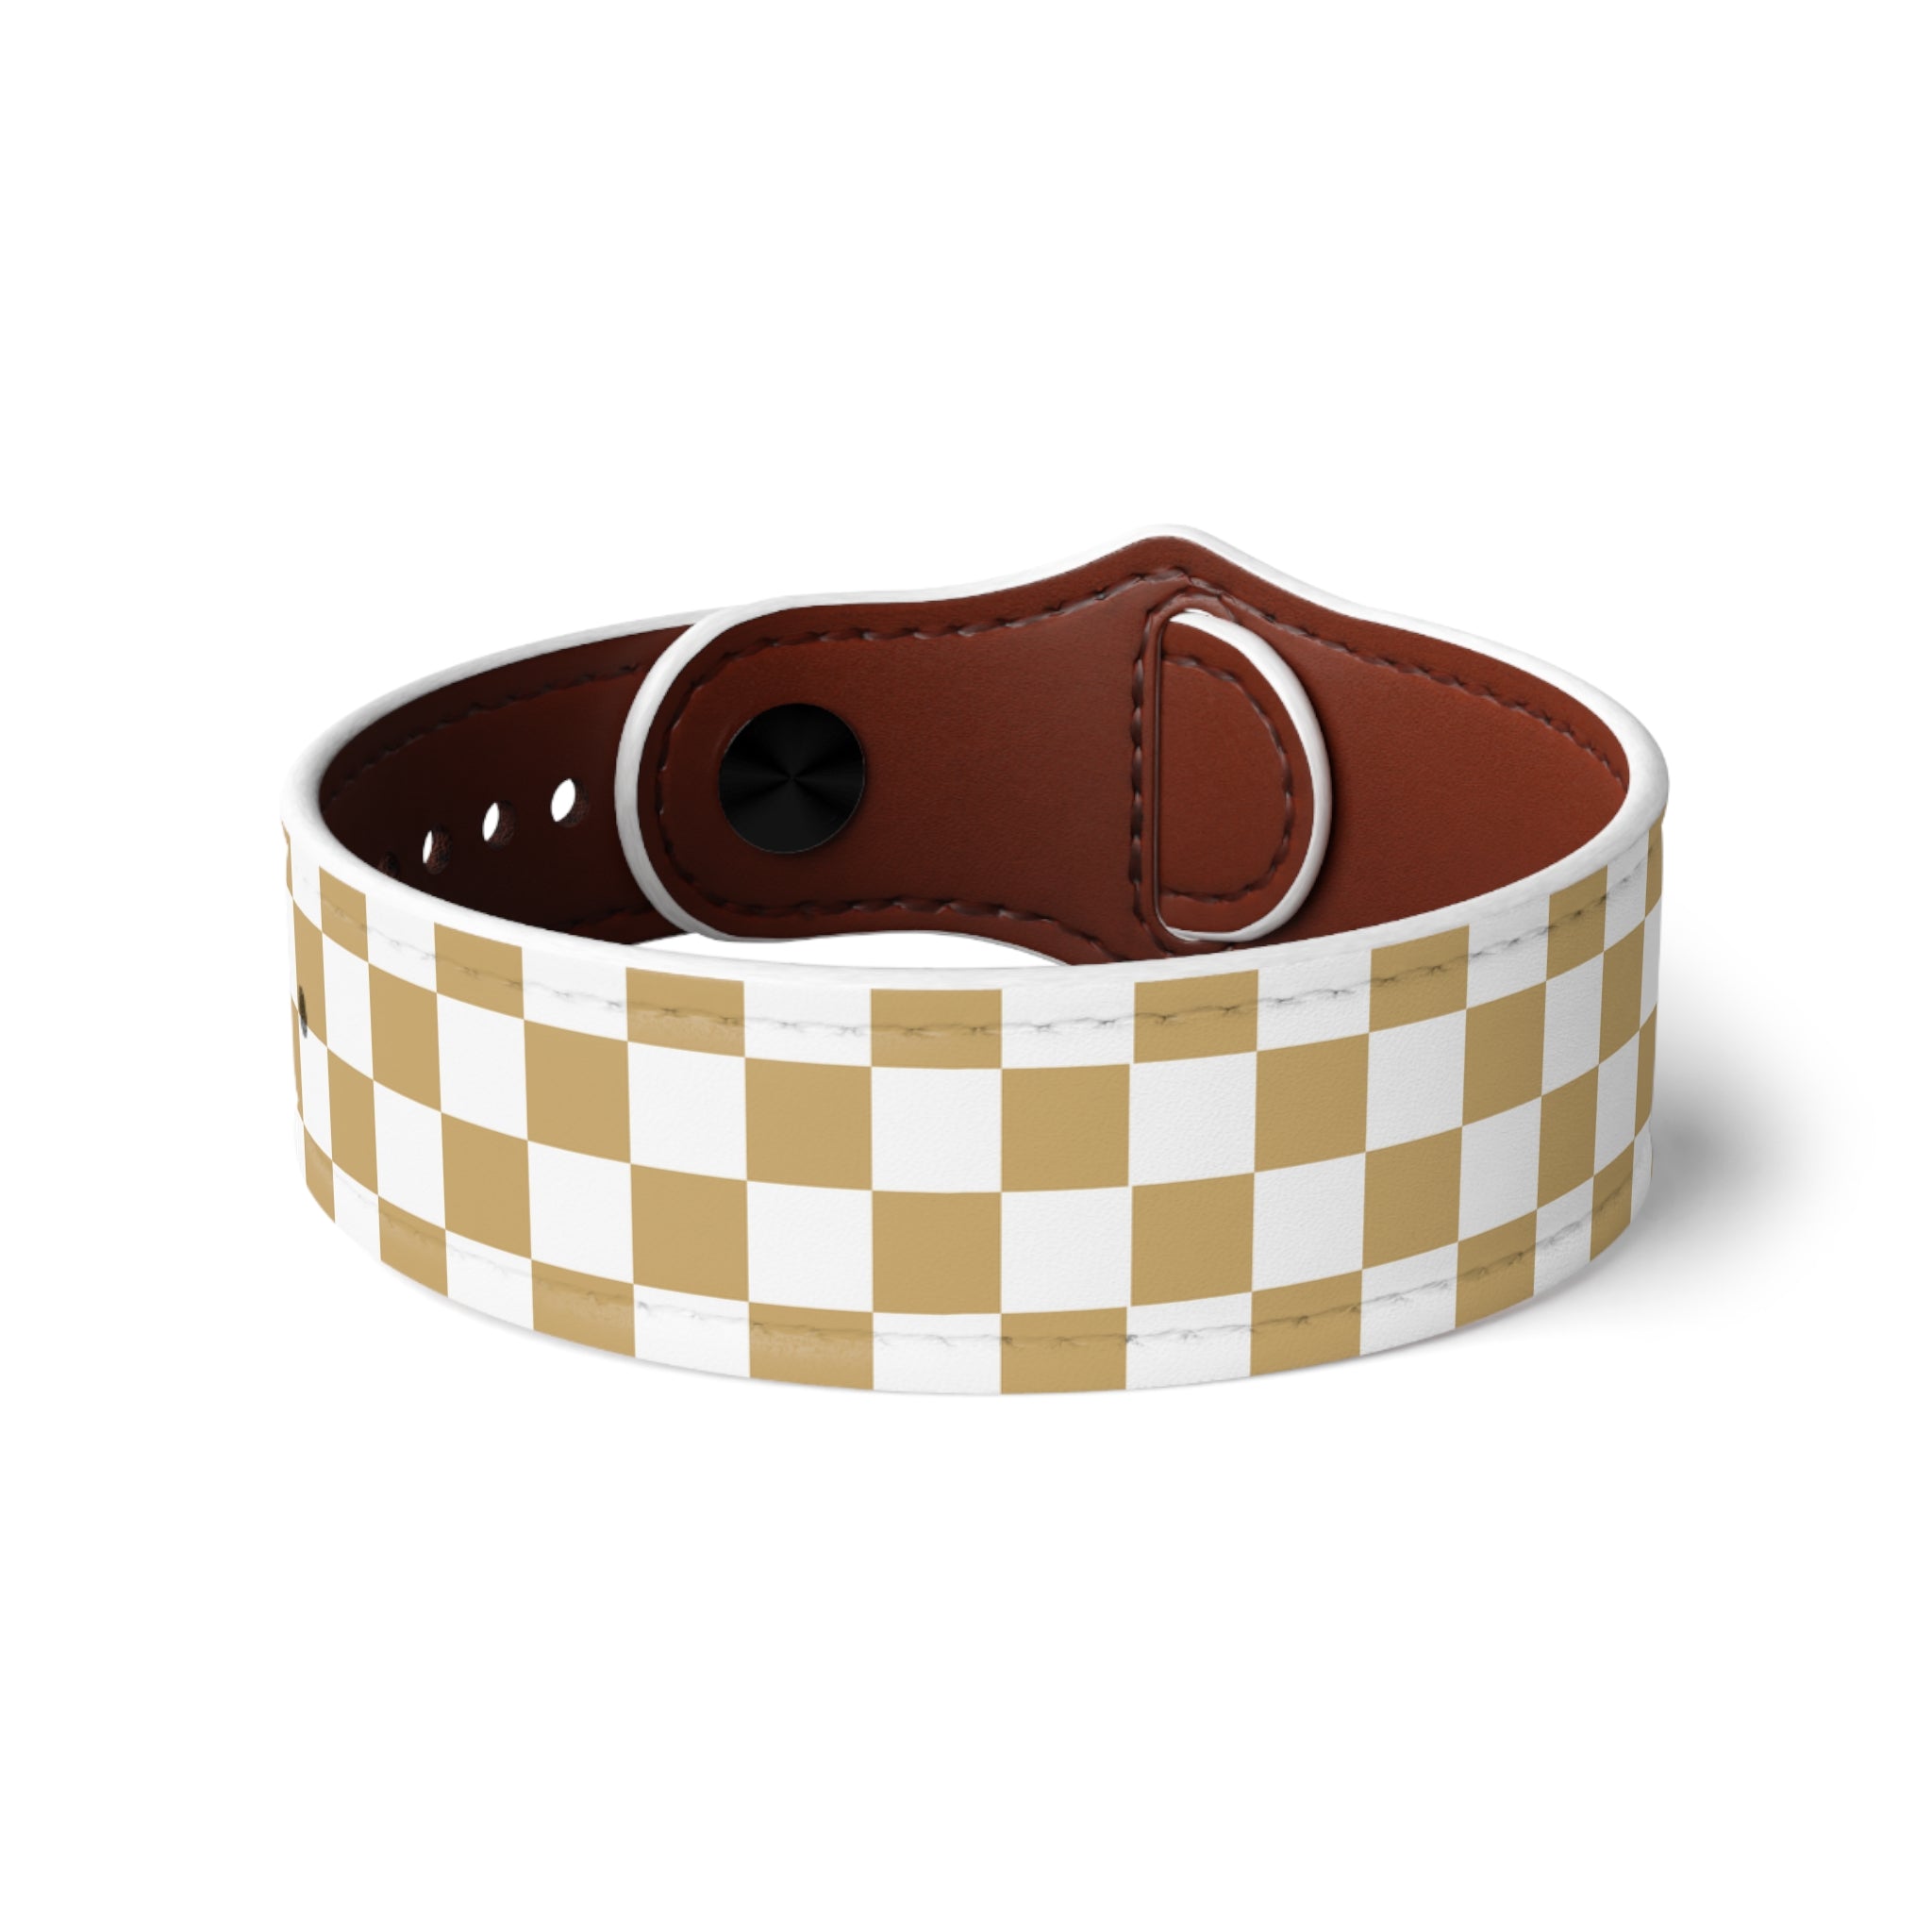 Casual Wear Accessories in Check Mate in Gold Faux Leather Wristband, Unisex Leather Bracelet, Faux Leather Cuff, Unisex Accessories